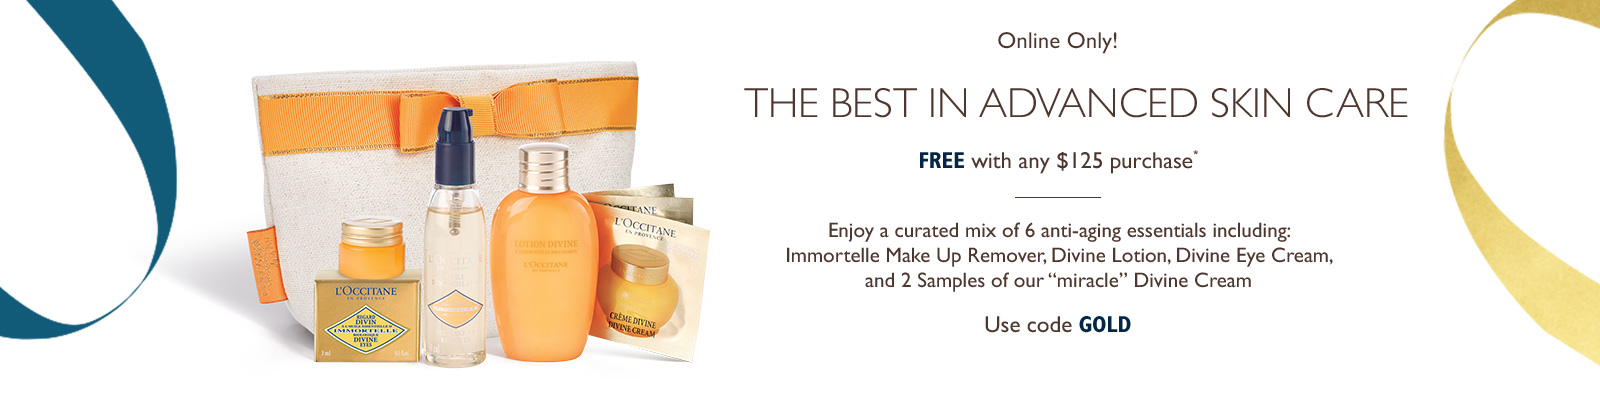 Receive a free 6-piece bonus gift with your $125 L'Occitane purchase